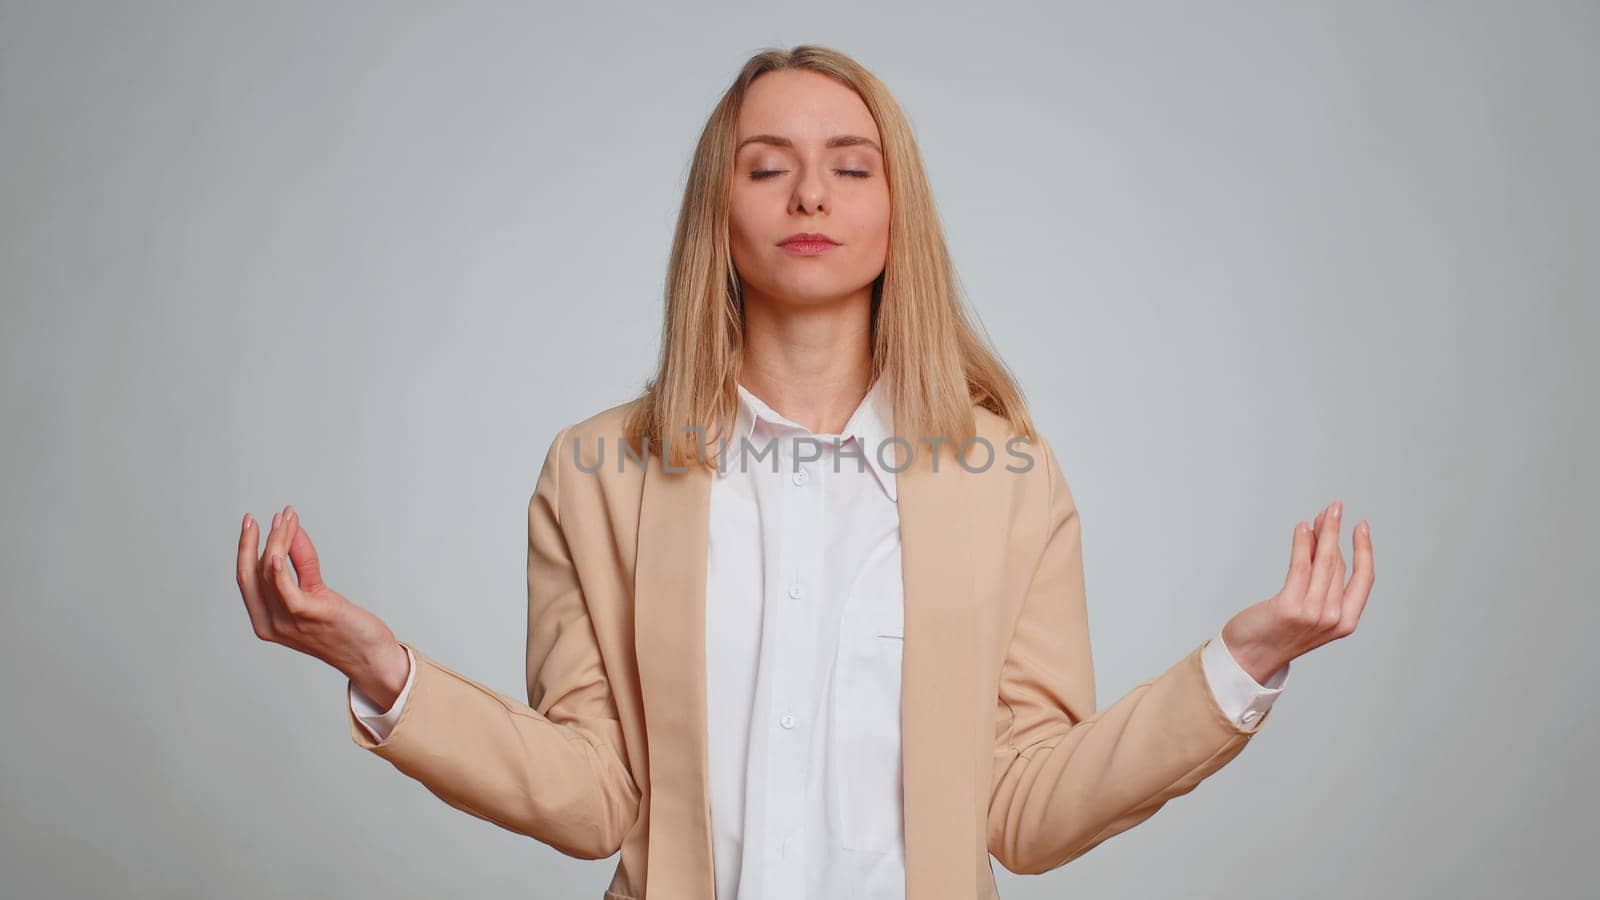 Keep calm down, relax, inner balance. Business woman breathes deeply with mudra gesture, eyes closed, meditating with concentrated thoughts, peaceful mind. Female girl in suit on gray background